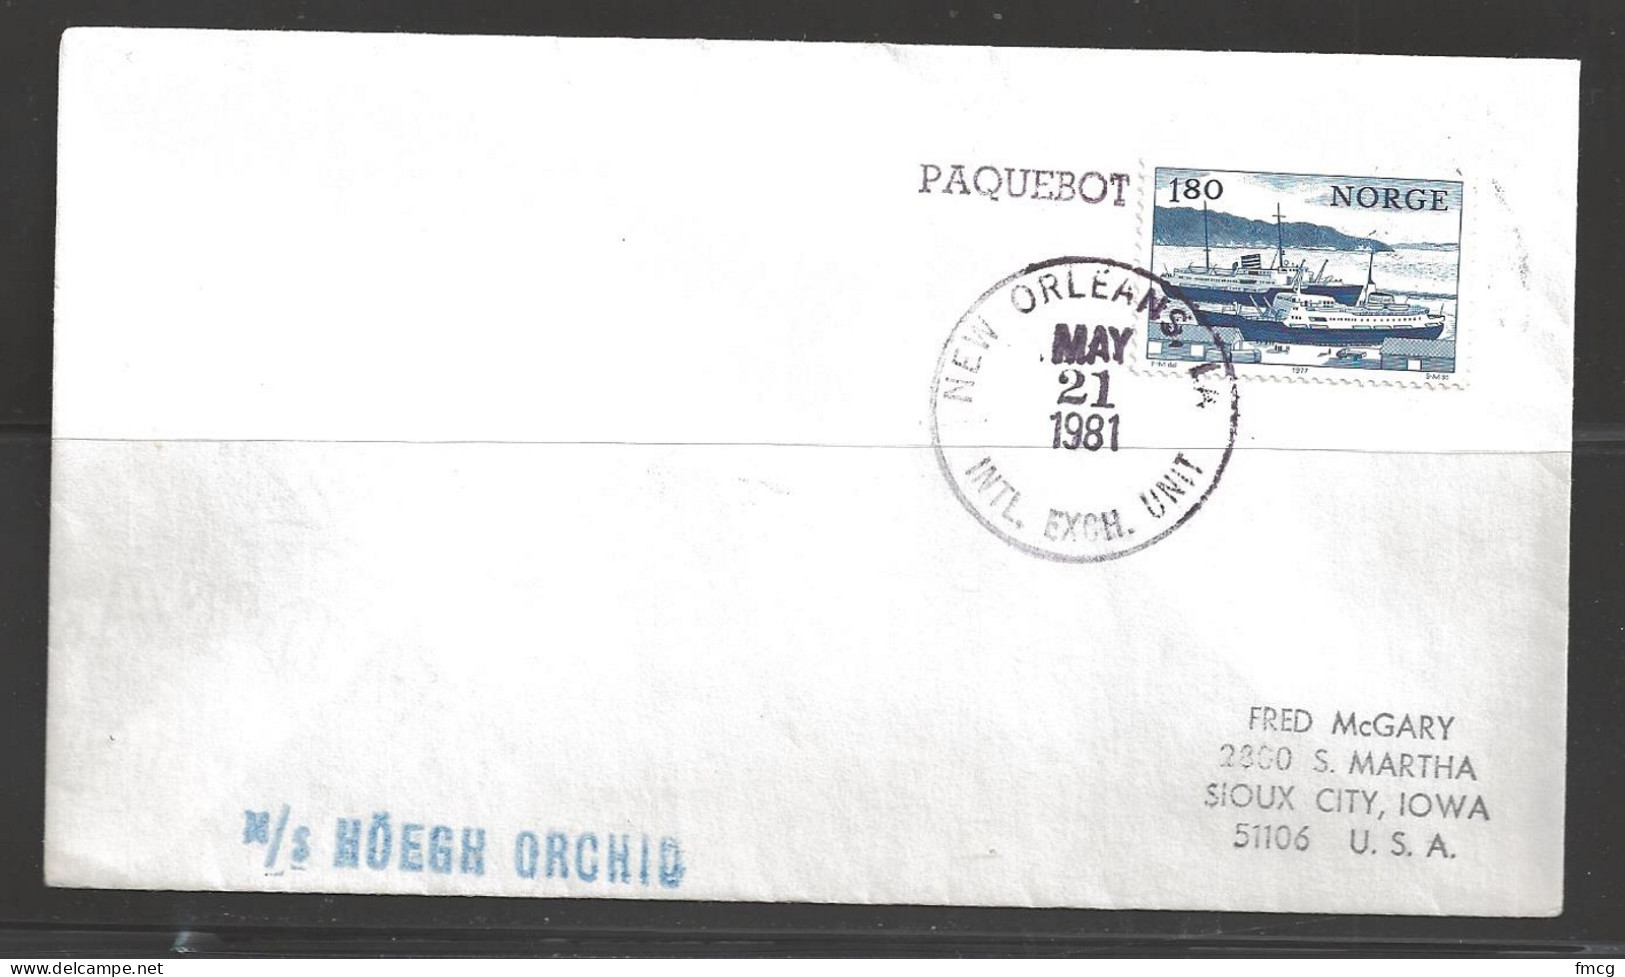 1981 Paquebot Cover, Norway Stamp Used In New Orleans, Louisiana - Covers & Documents